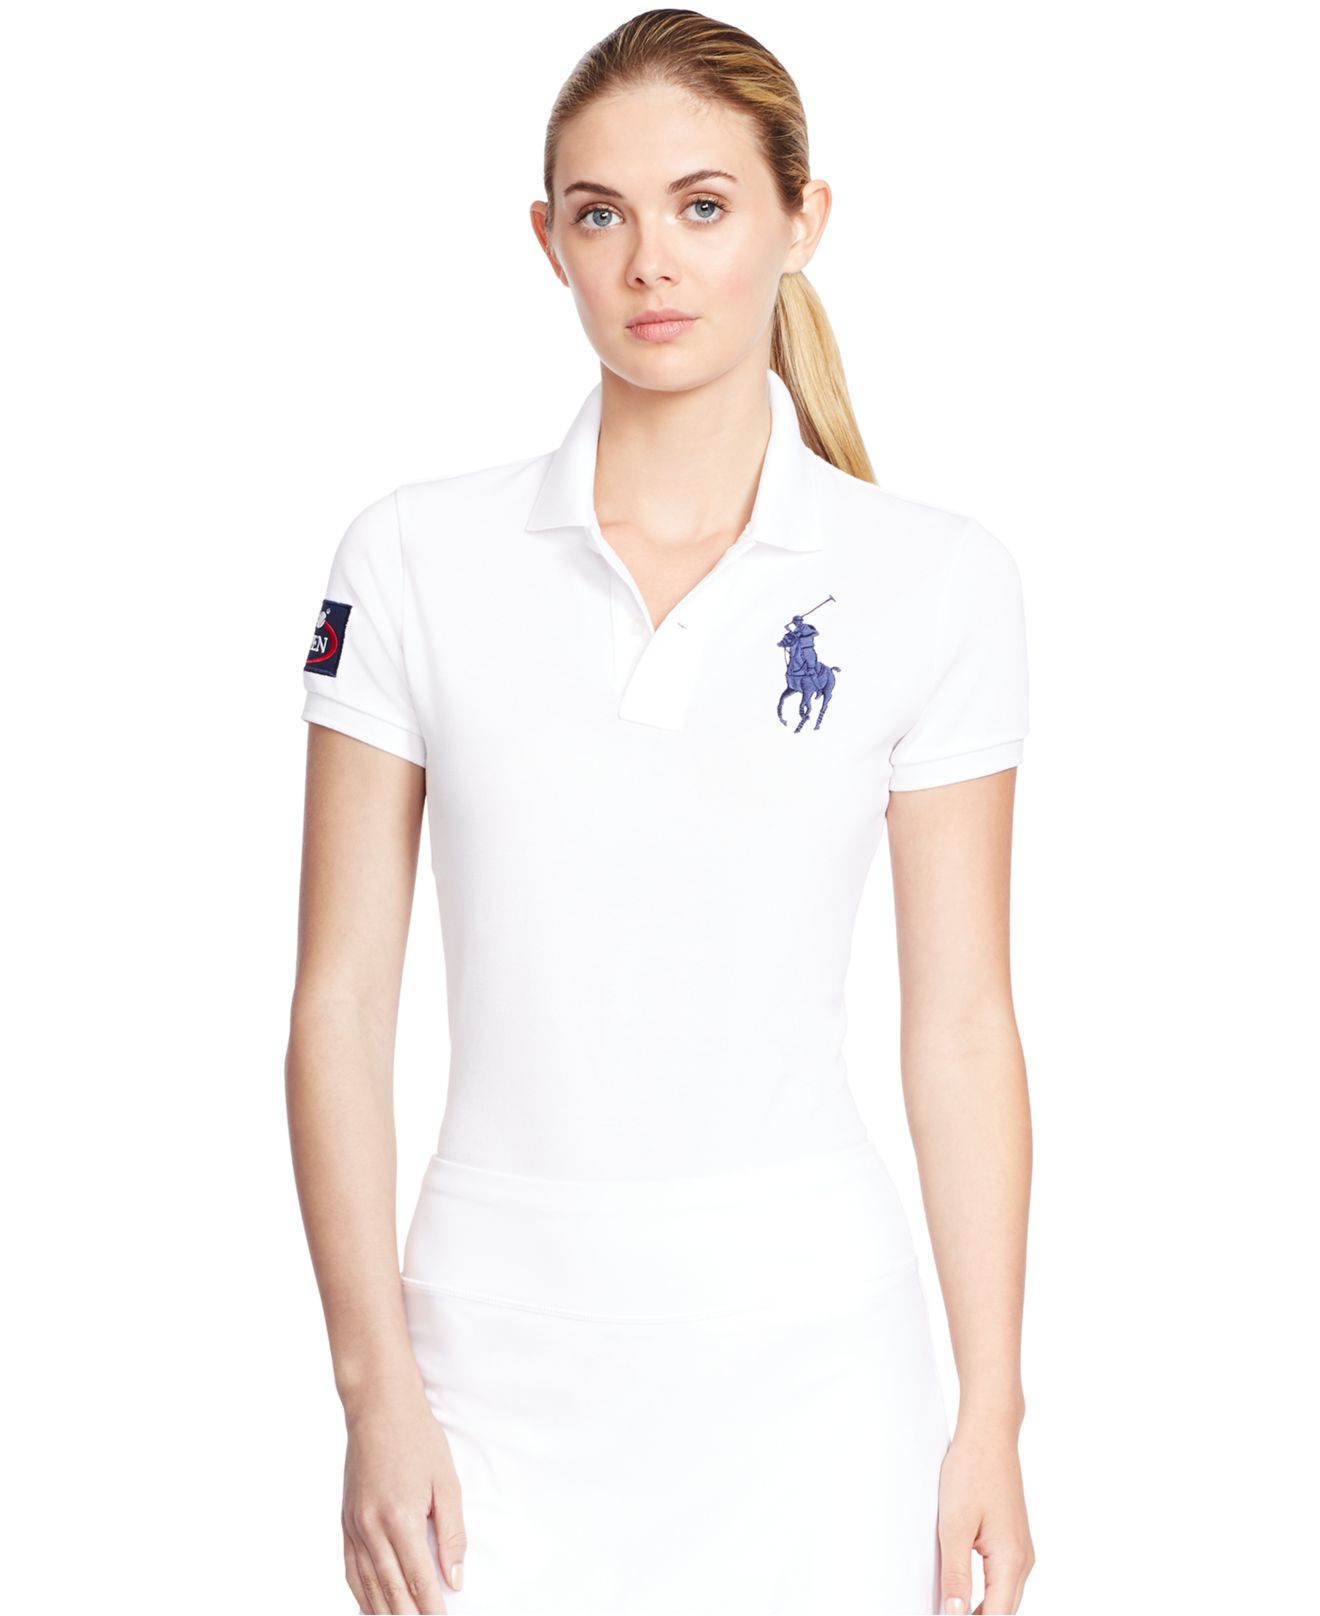 Lyst - Polo Ralph Lauren Us Open Big Pony Polo in White